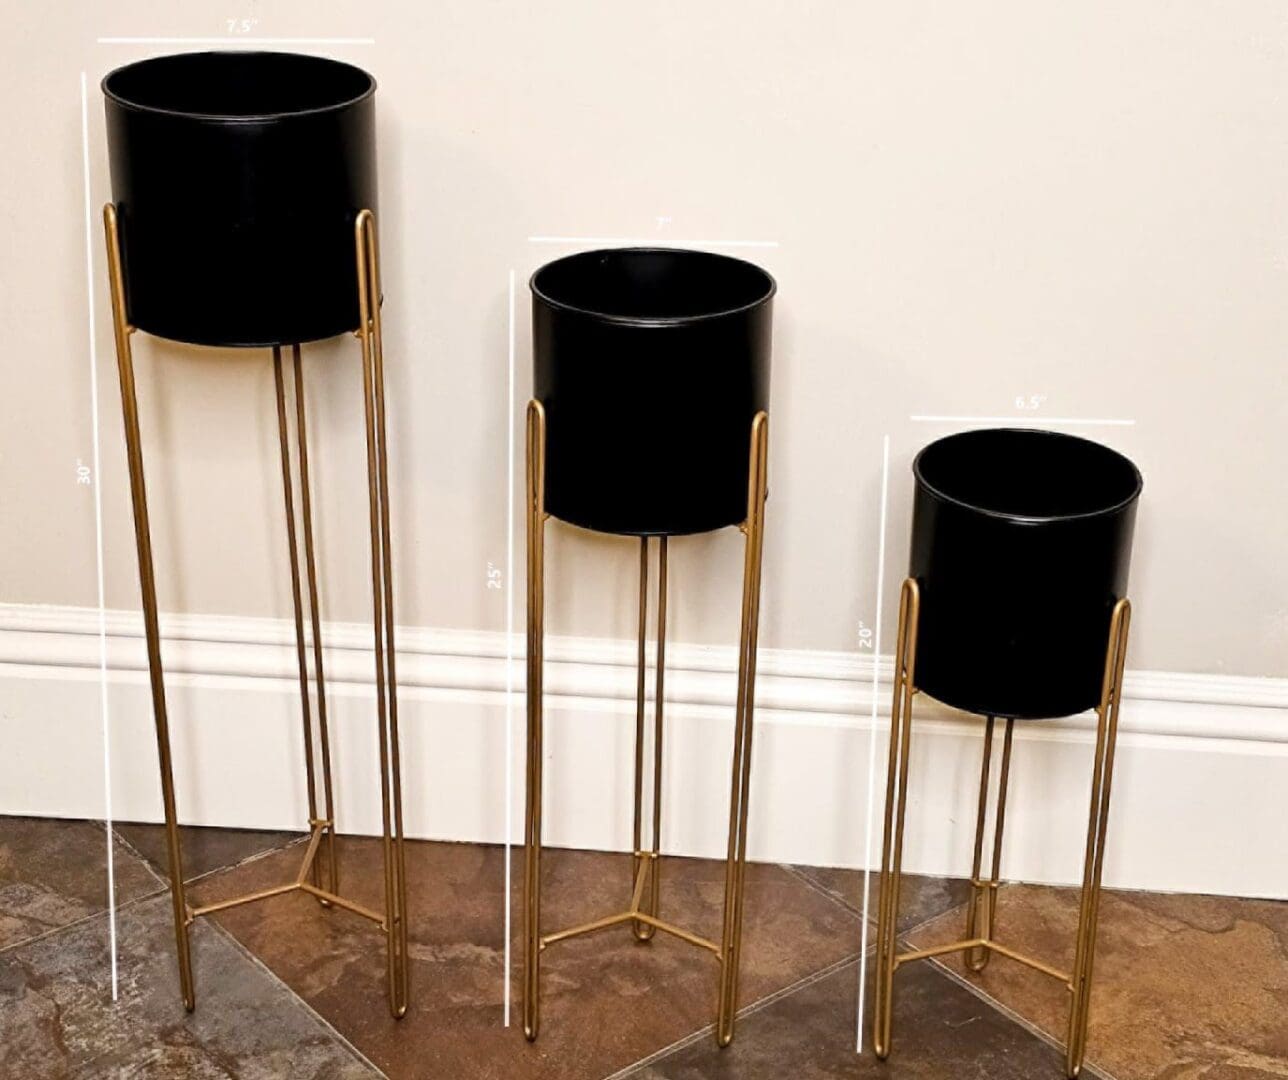 Three black and gold plant stands on a floor.